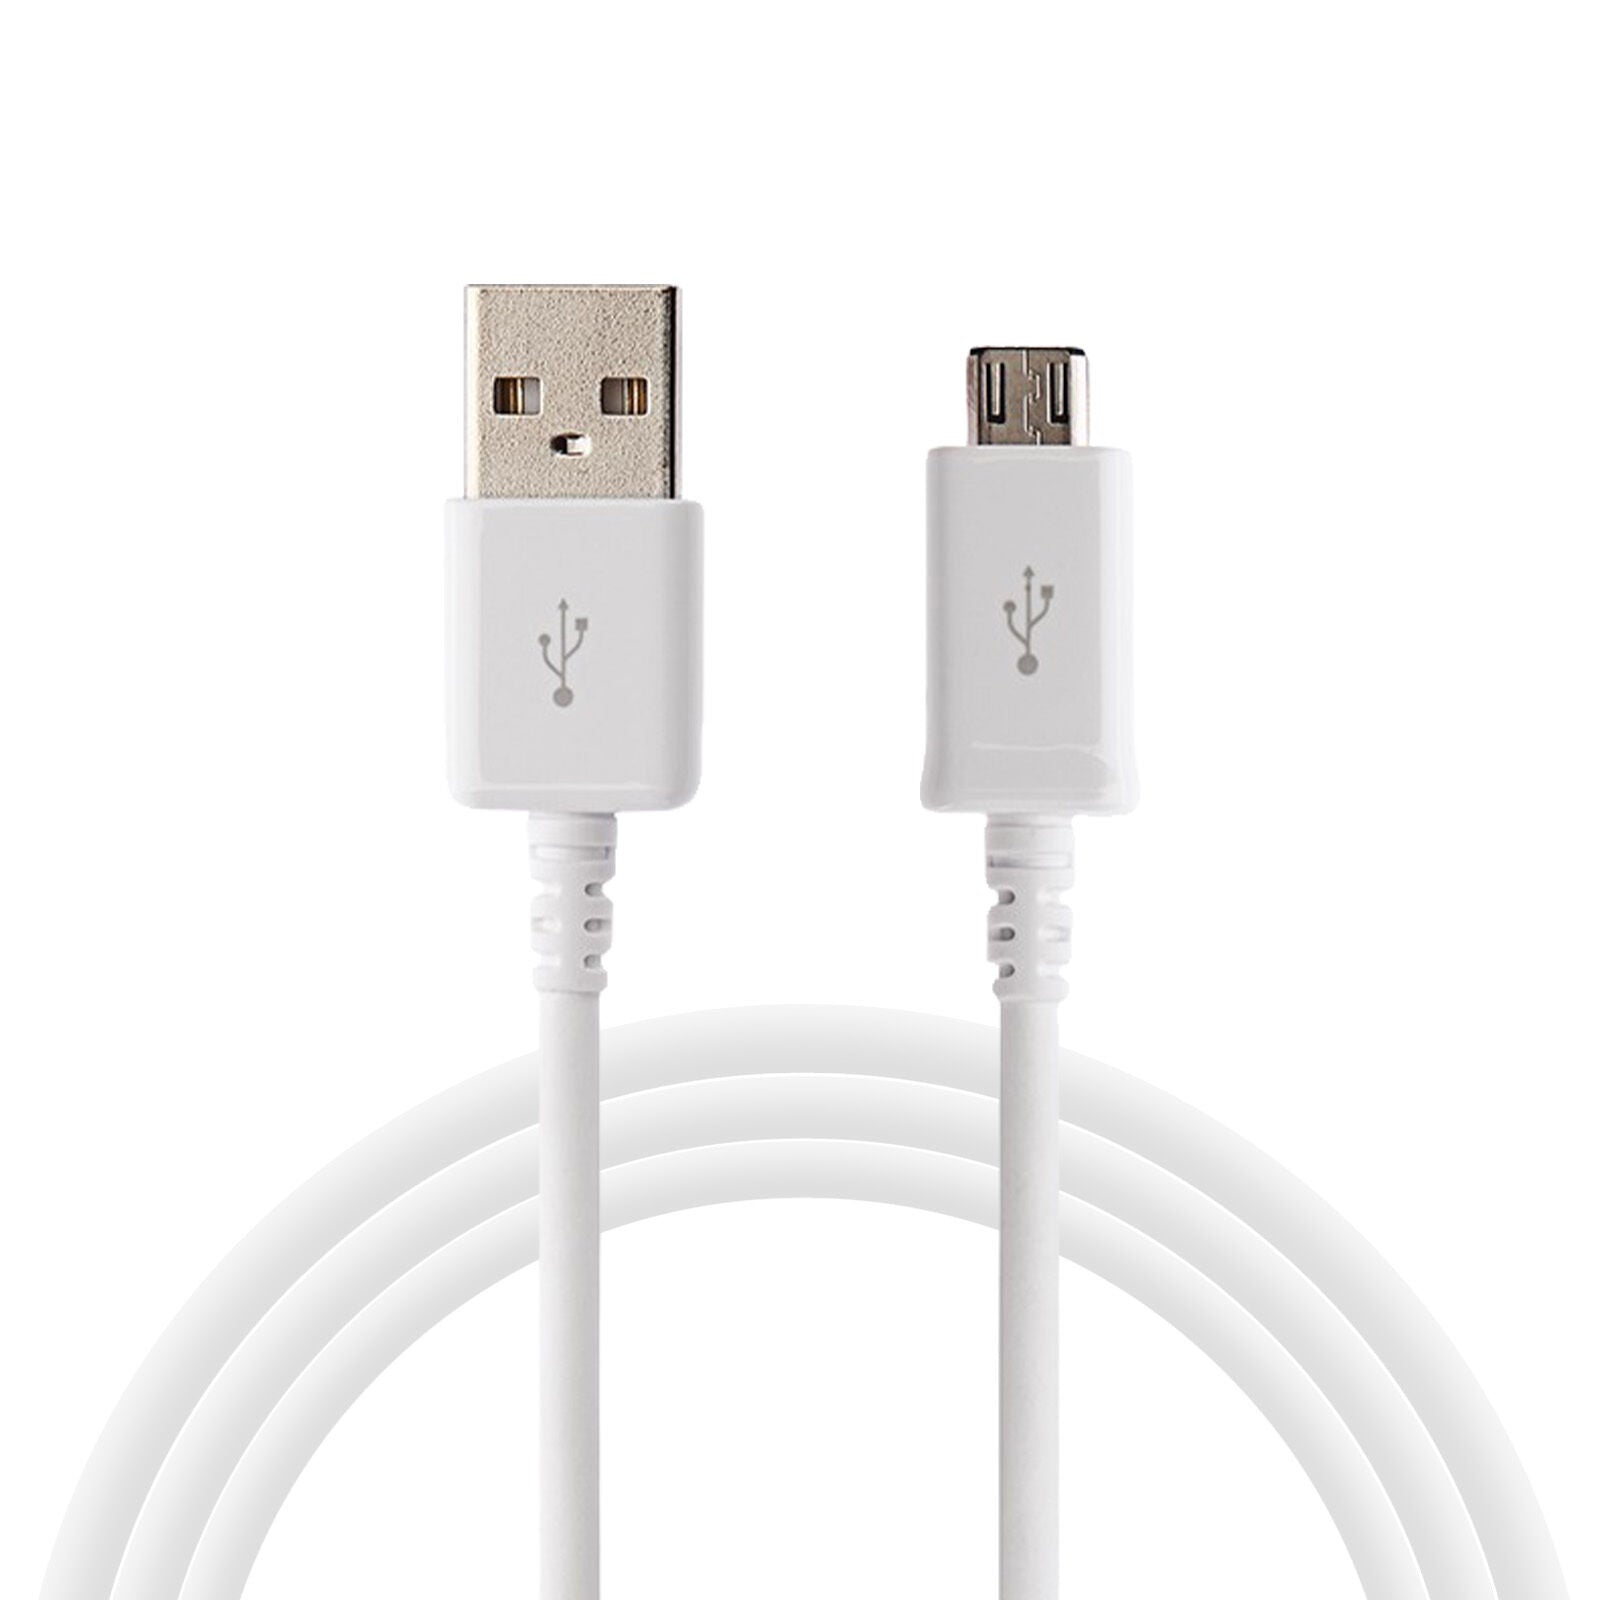 Pack of 2 - Micro USB Data Charger Cable